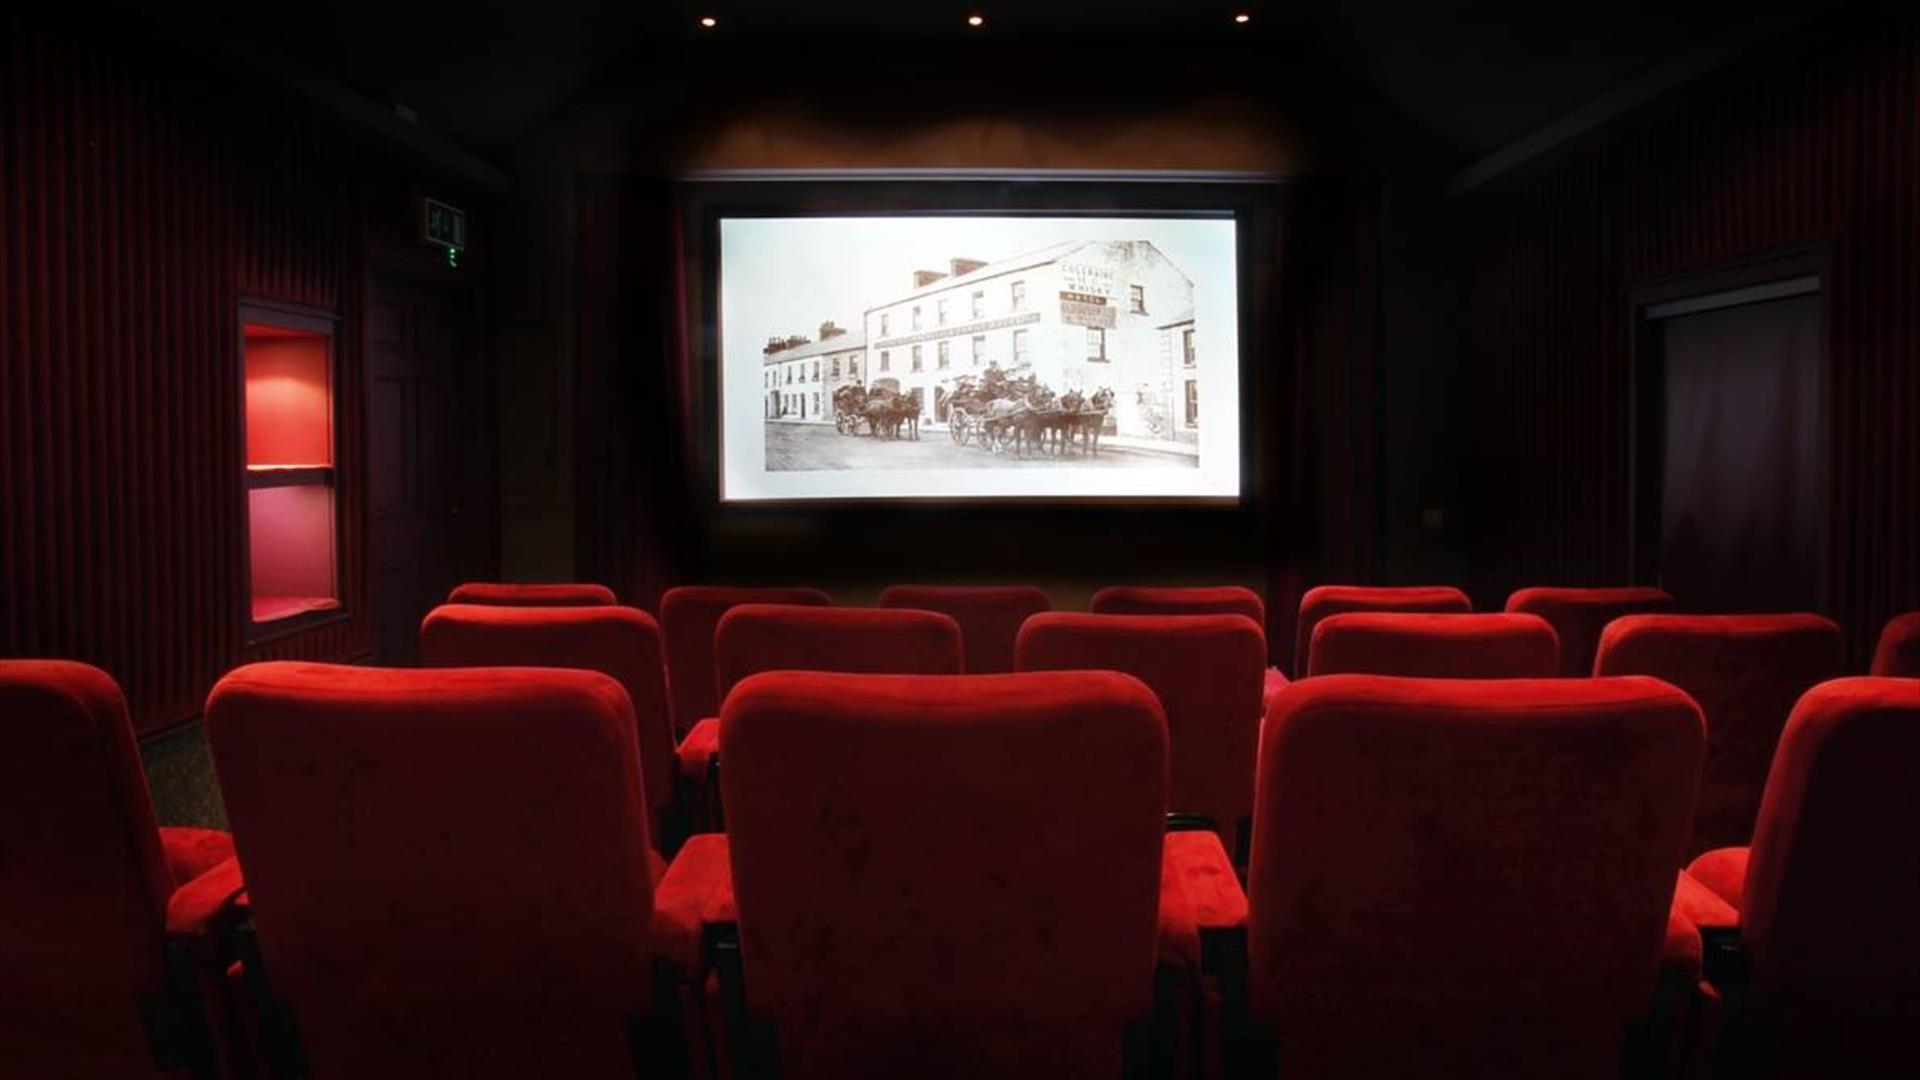 Image shows a movie theatre with red seats